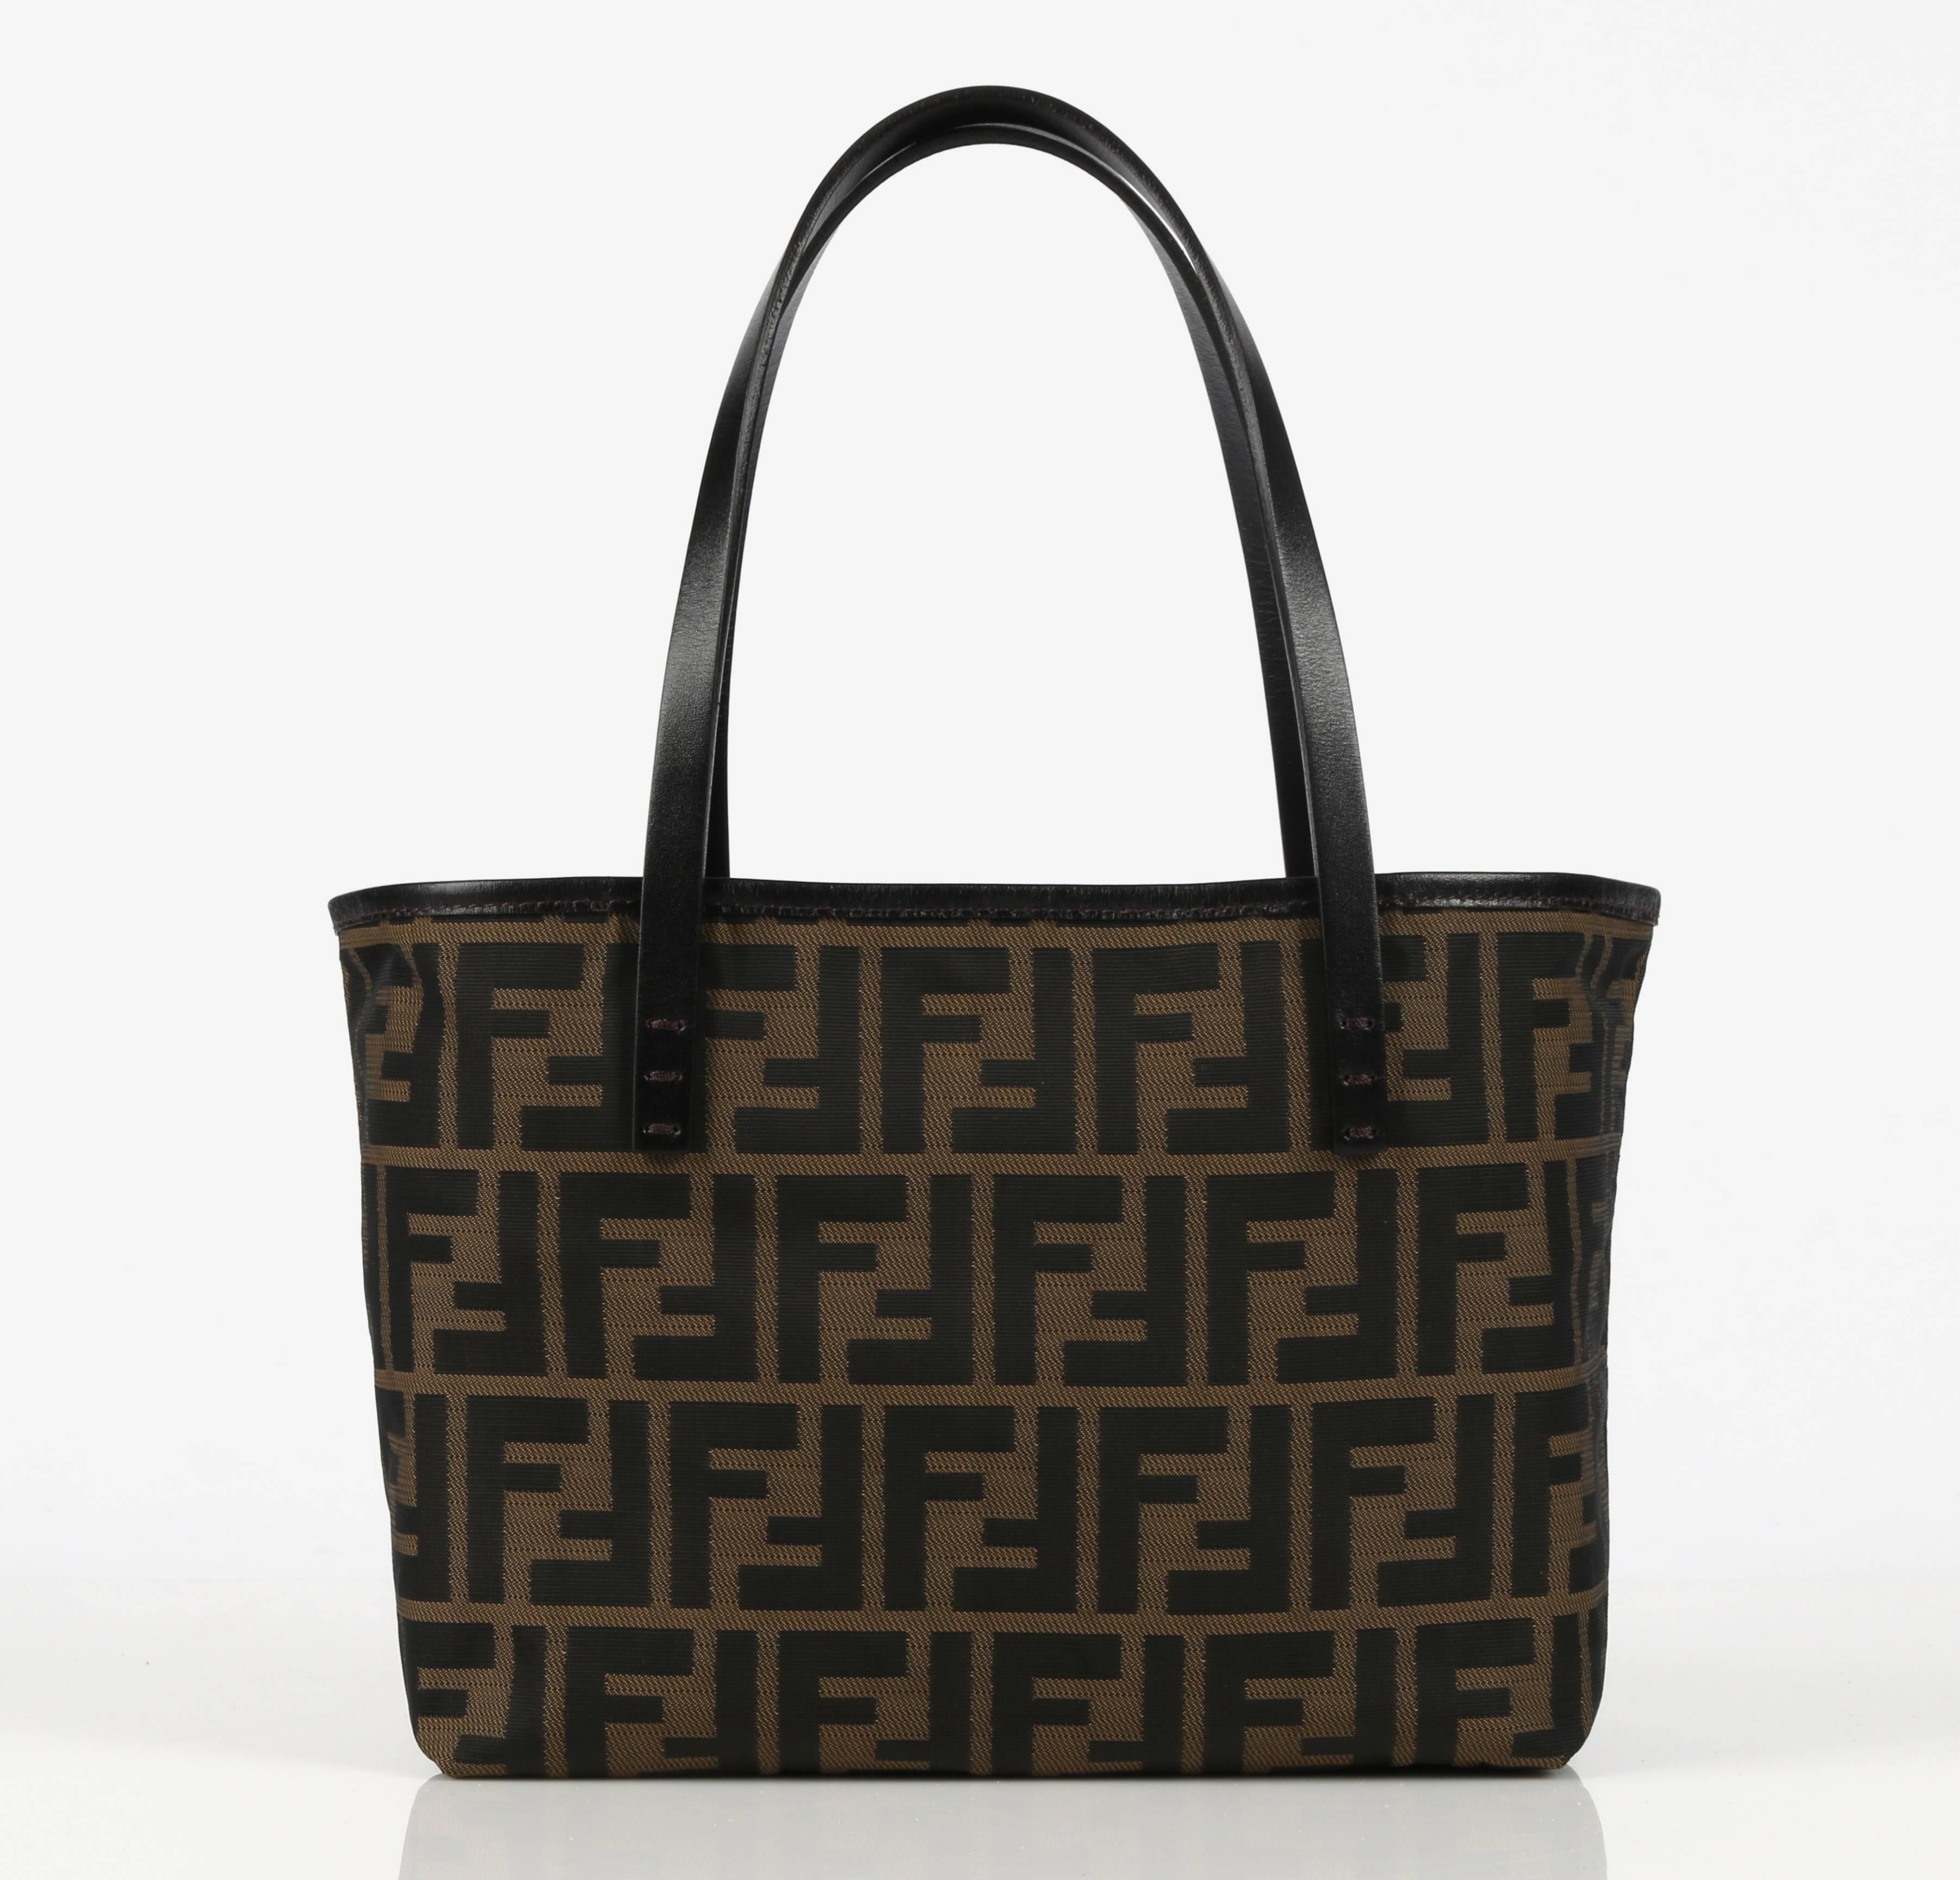 Fendi brown tobacco canvas & genuine leather Zucca print "Roll" tote bag. Brown signature "FF" Zucca print body. Brown leather trim and handles. Open top. Matching zip top coin purse attached to interior via thin leather